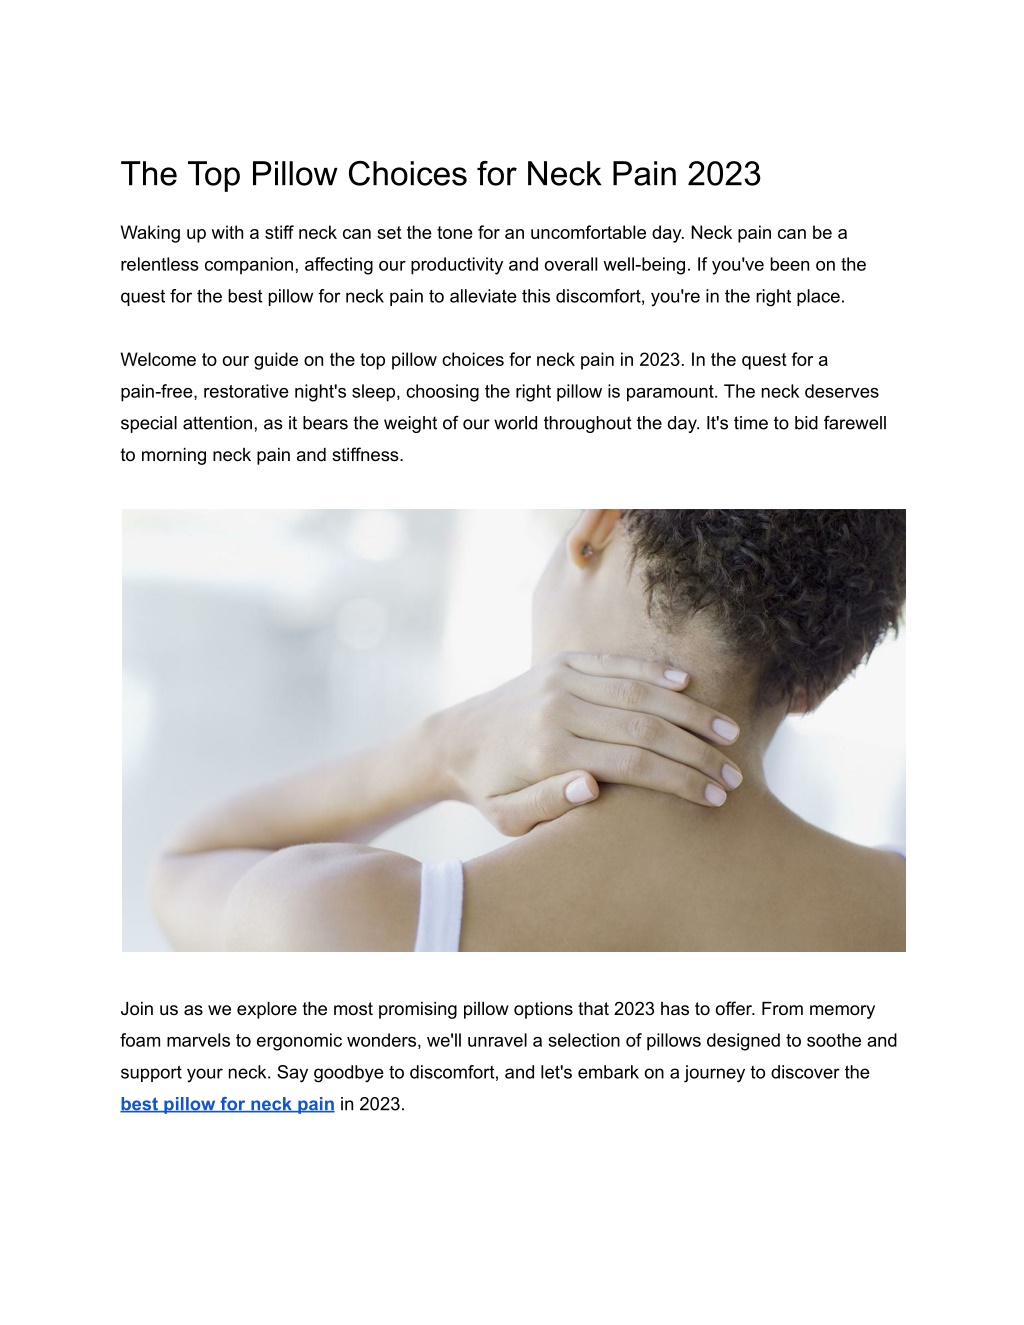 PPT - The Top Pillow Choices for Neck Pain 2023 PowerPoint Presentation -  ID:12509252